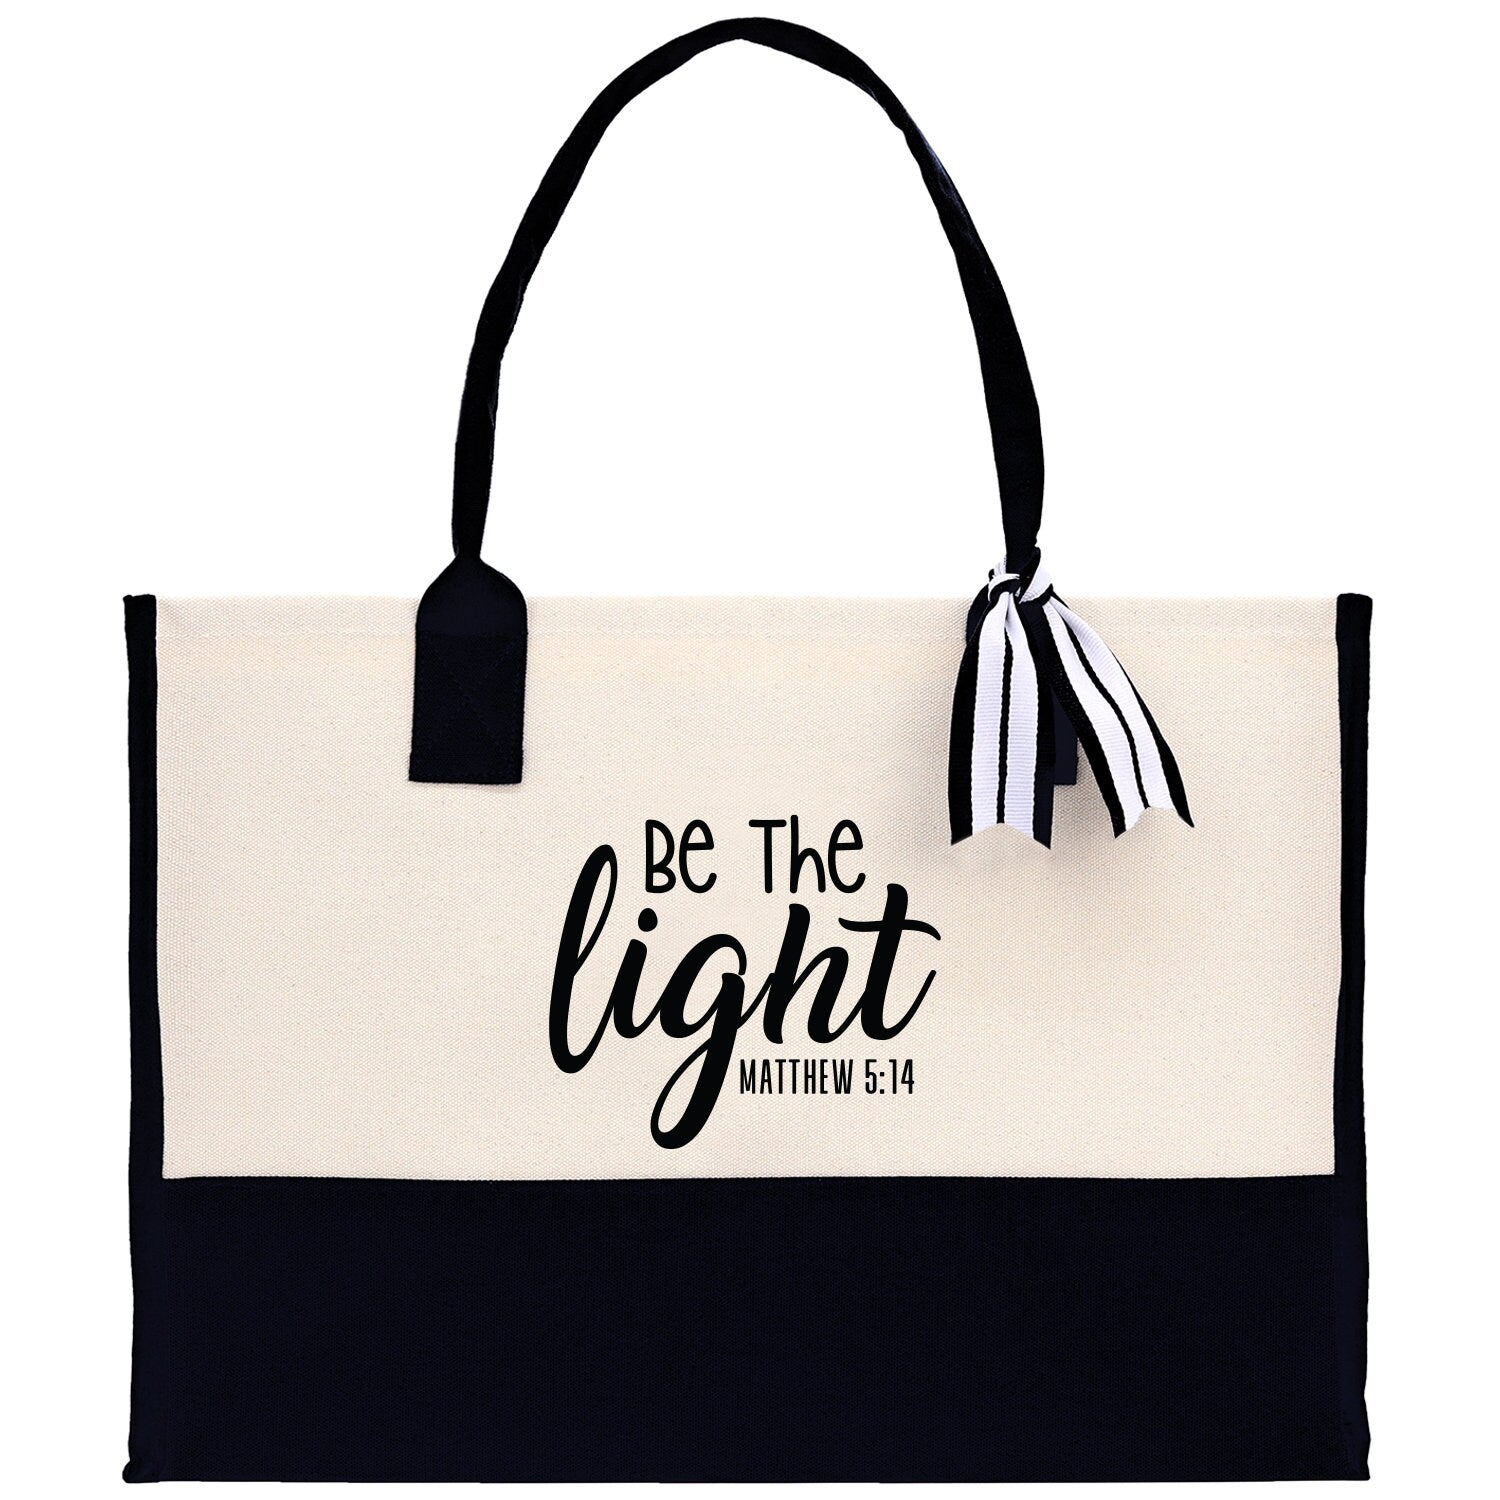 Be The Light Matthew 5:14 Religious Tote Bag for Women Bible Verse Canvas Tote Bag Religious Gifts Bible Verse Gift Church Tote Bag